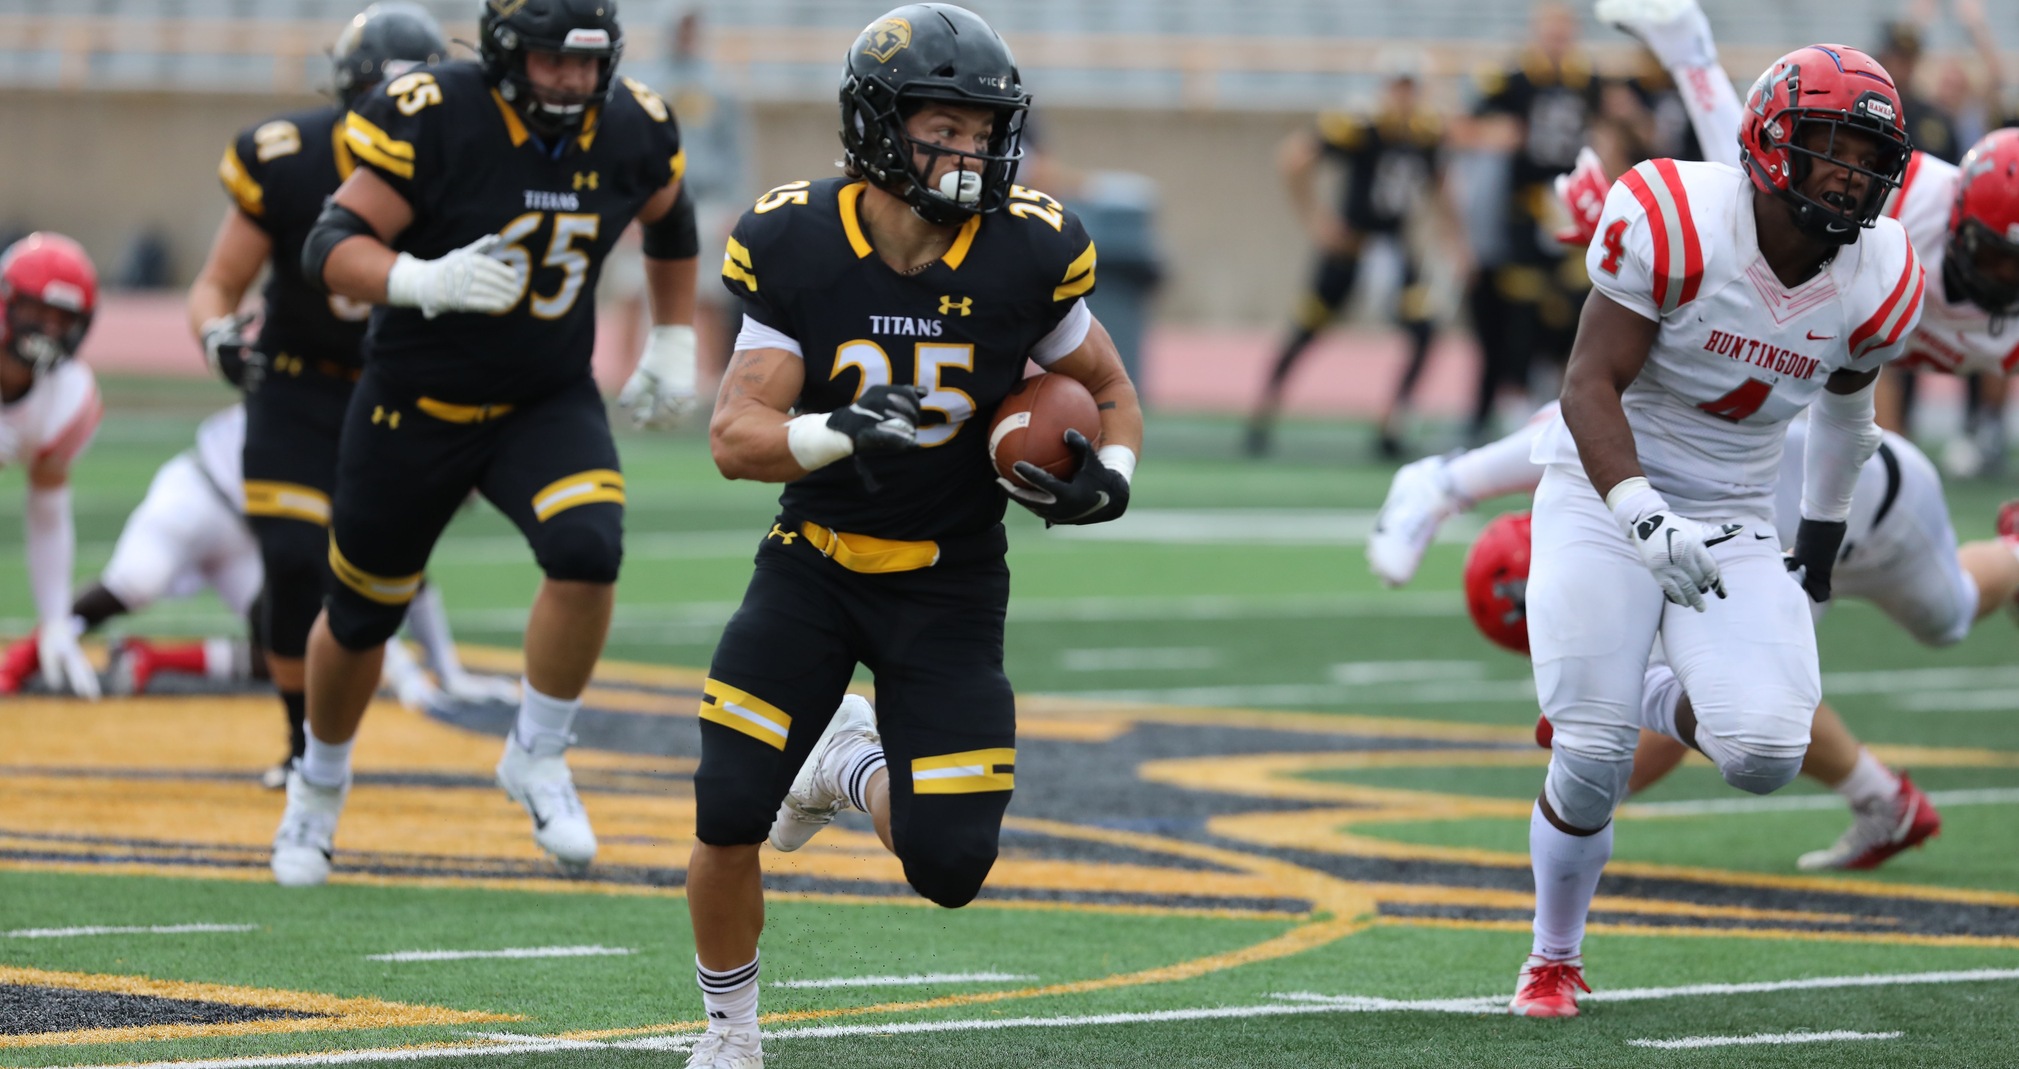 Chris Hess rushed six times for 106 yards, including a 55-yard touchdown, against the Hawks.